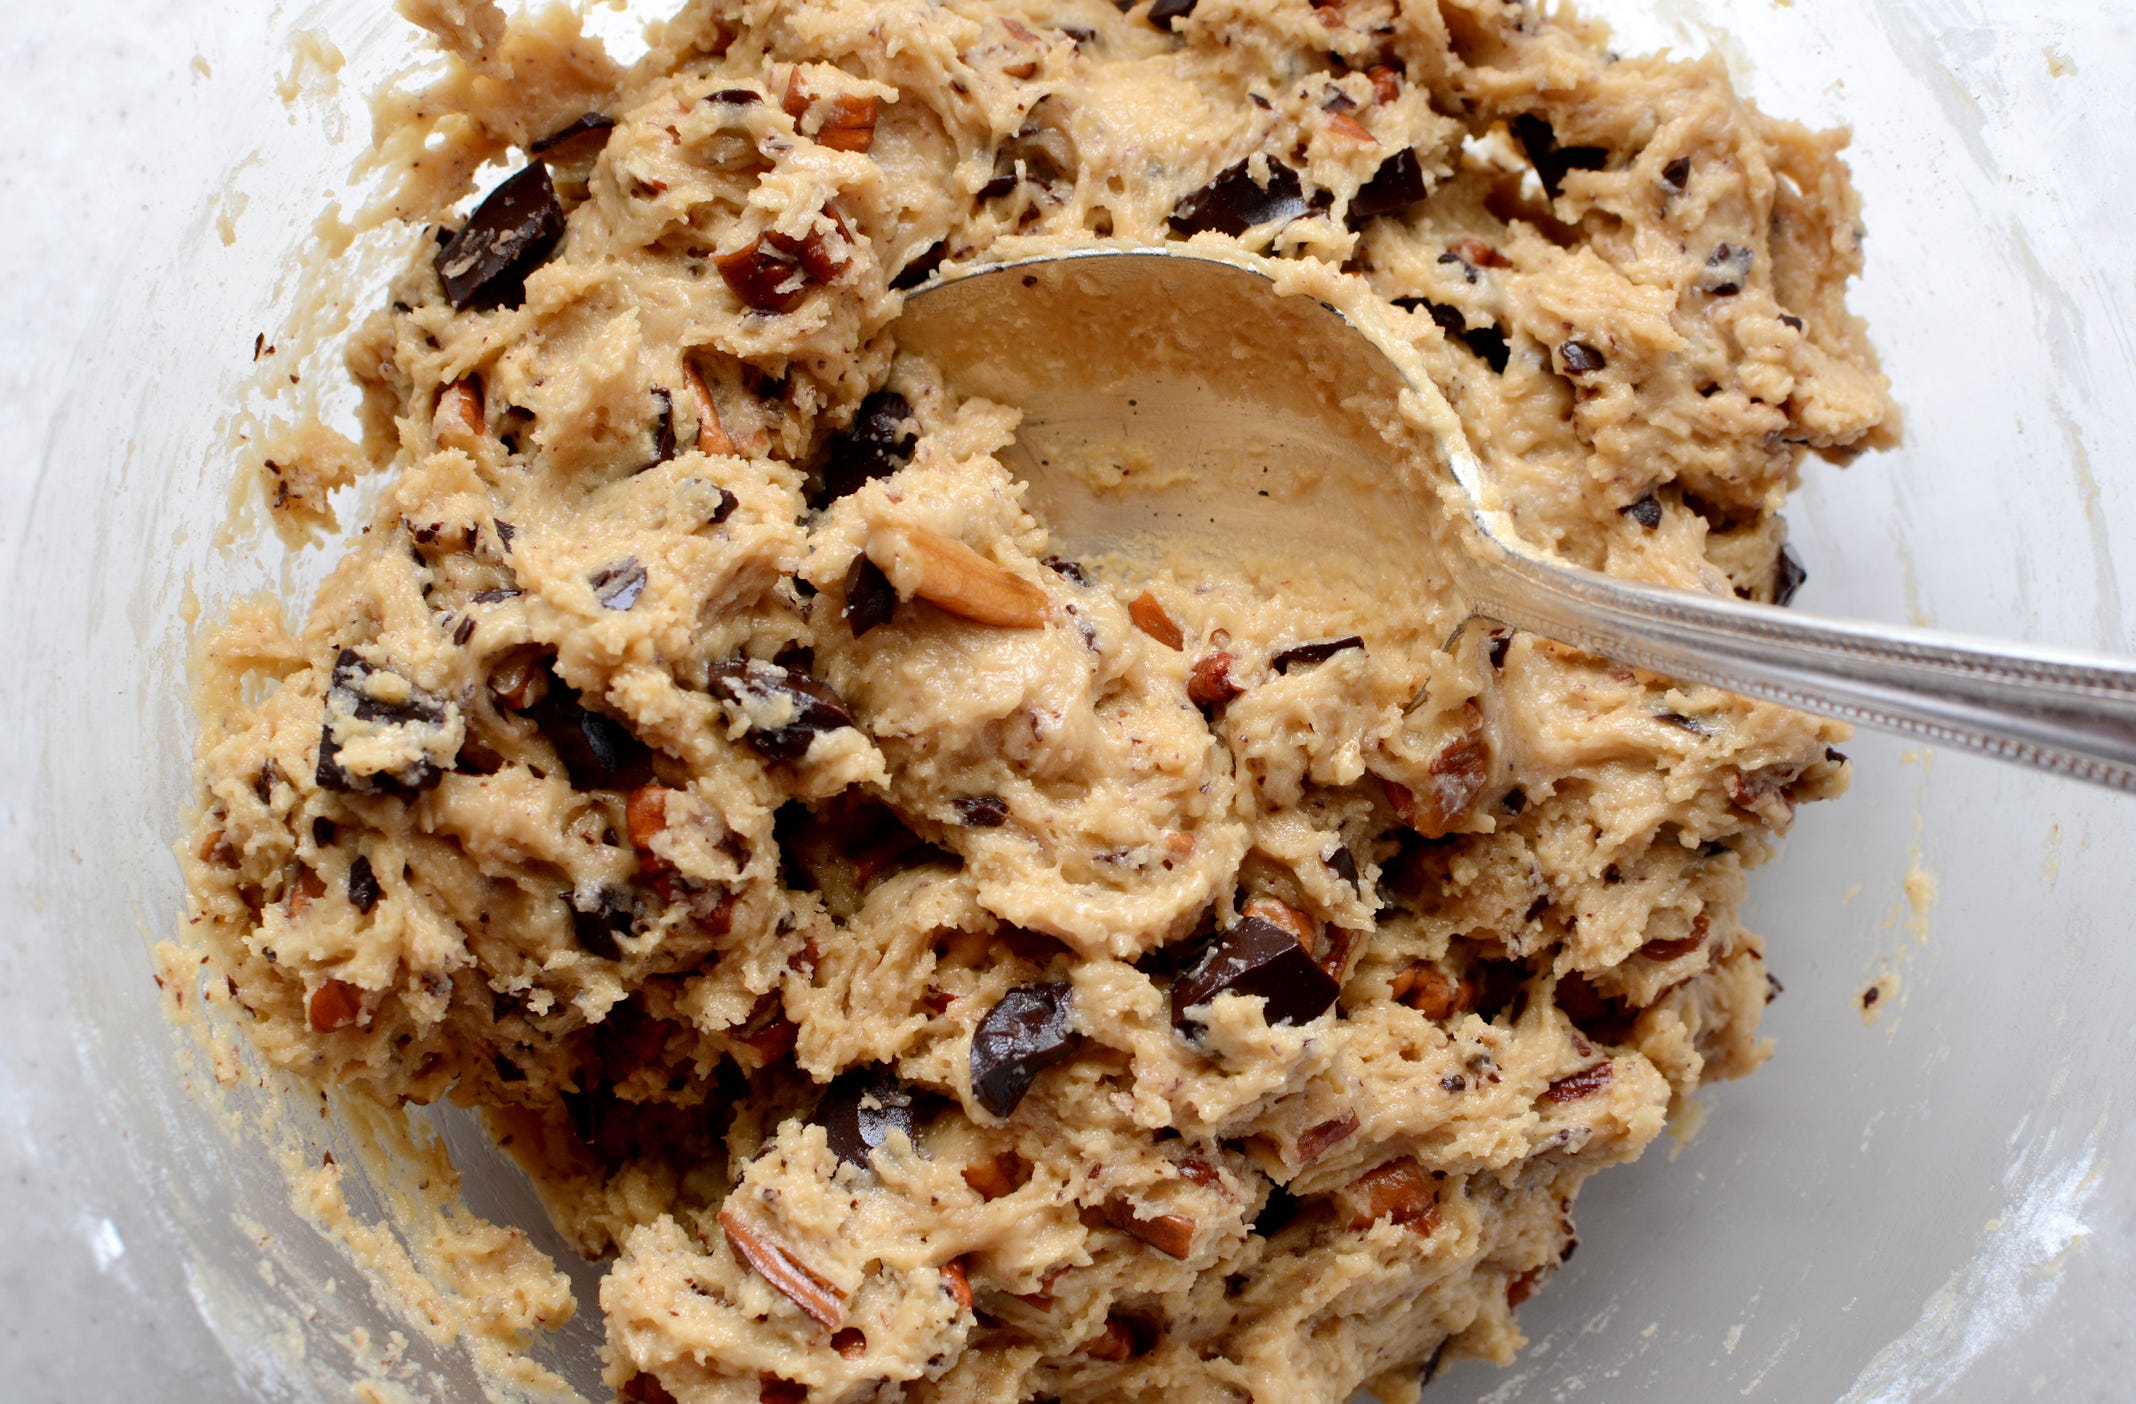 Can I Eat Raw Cookie Dough No The Cdc Warns